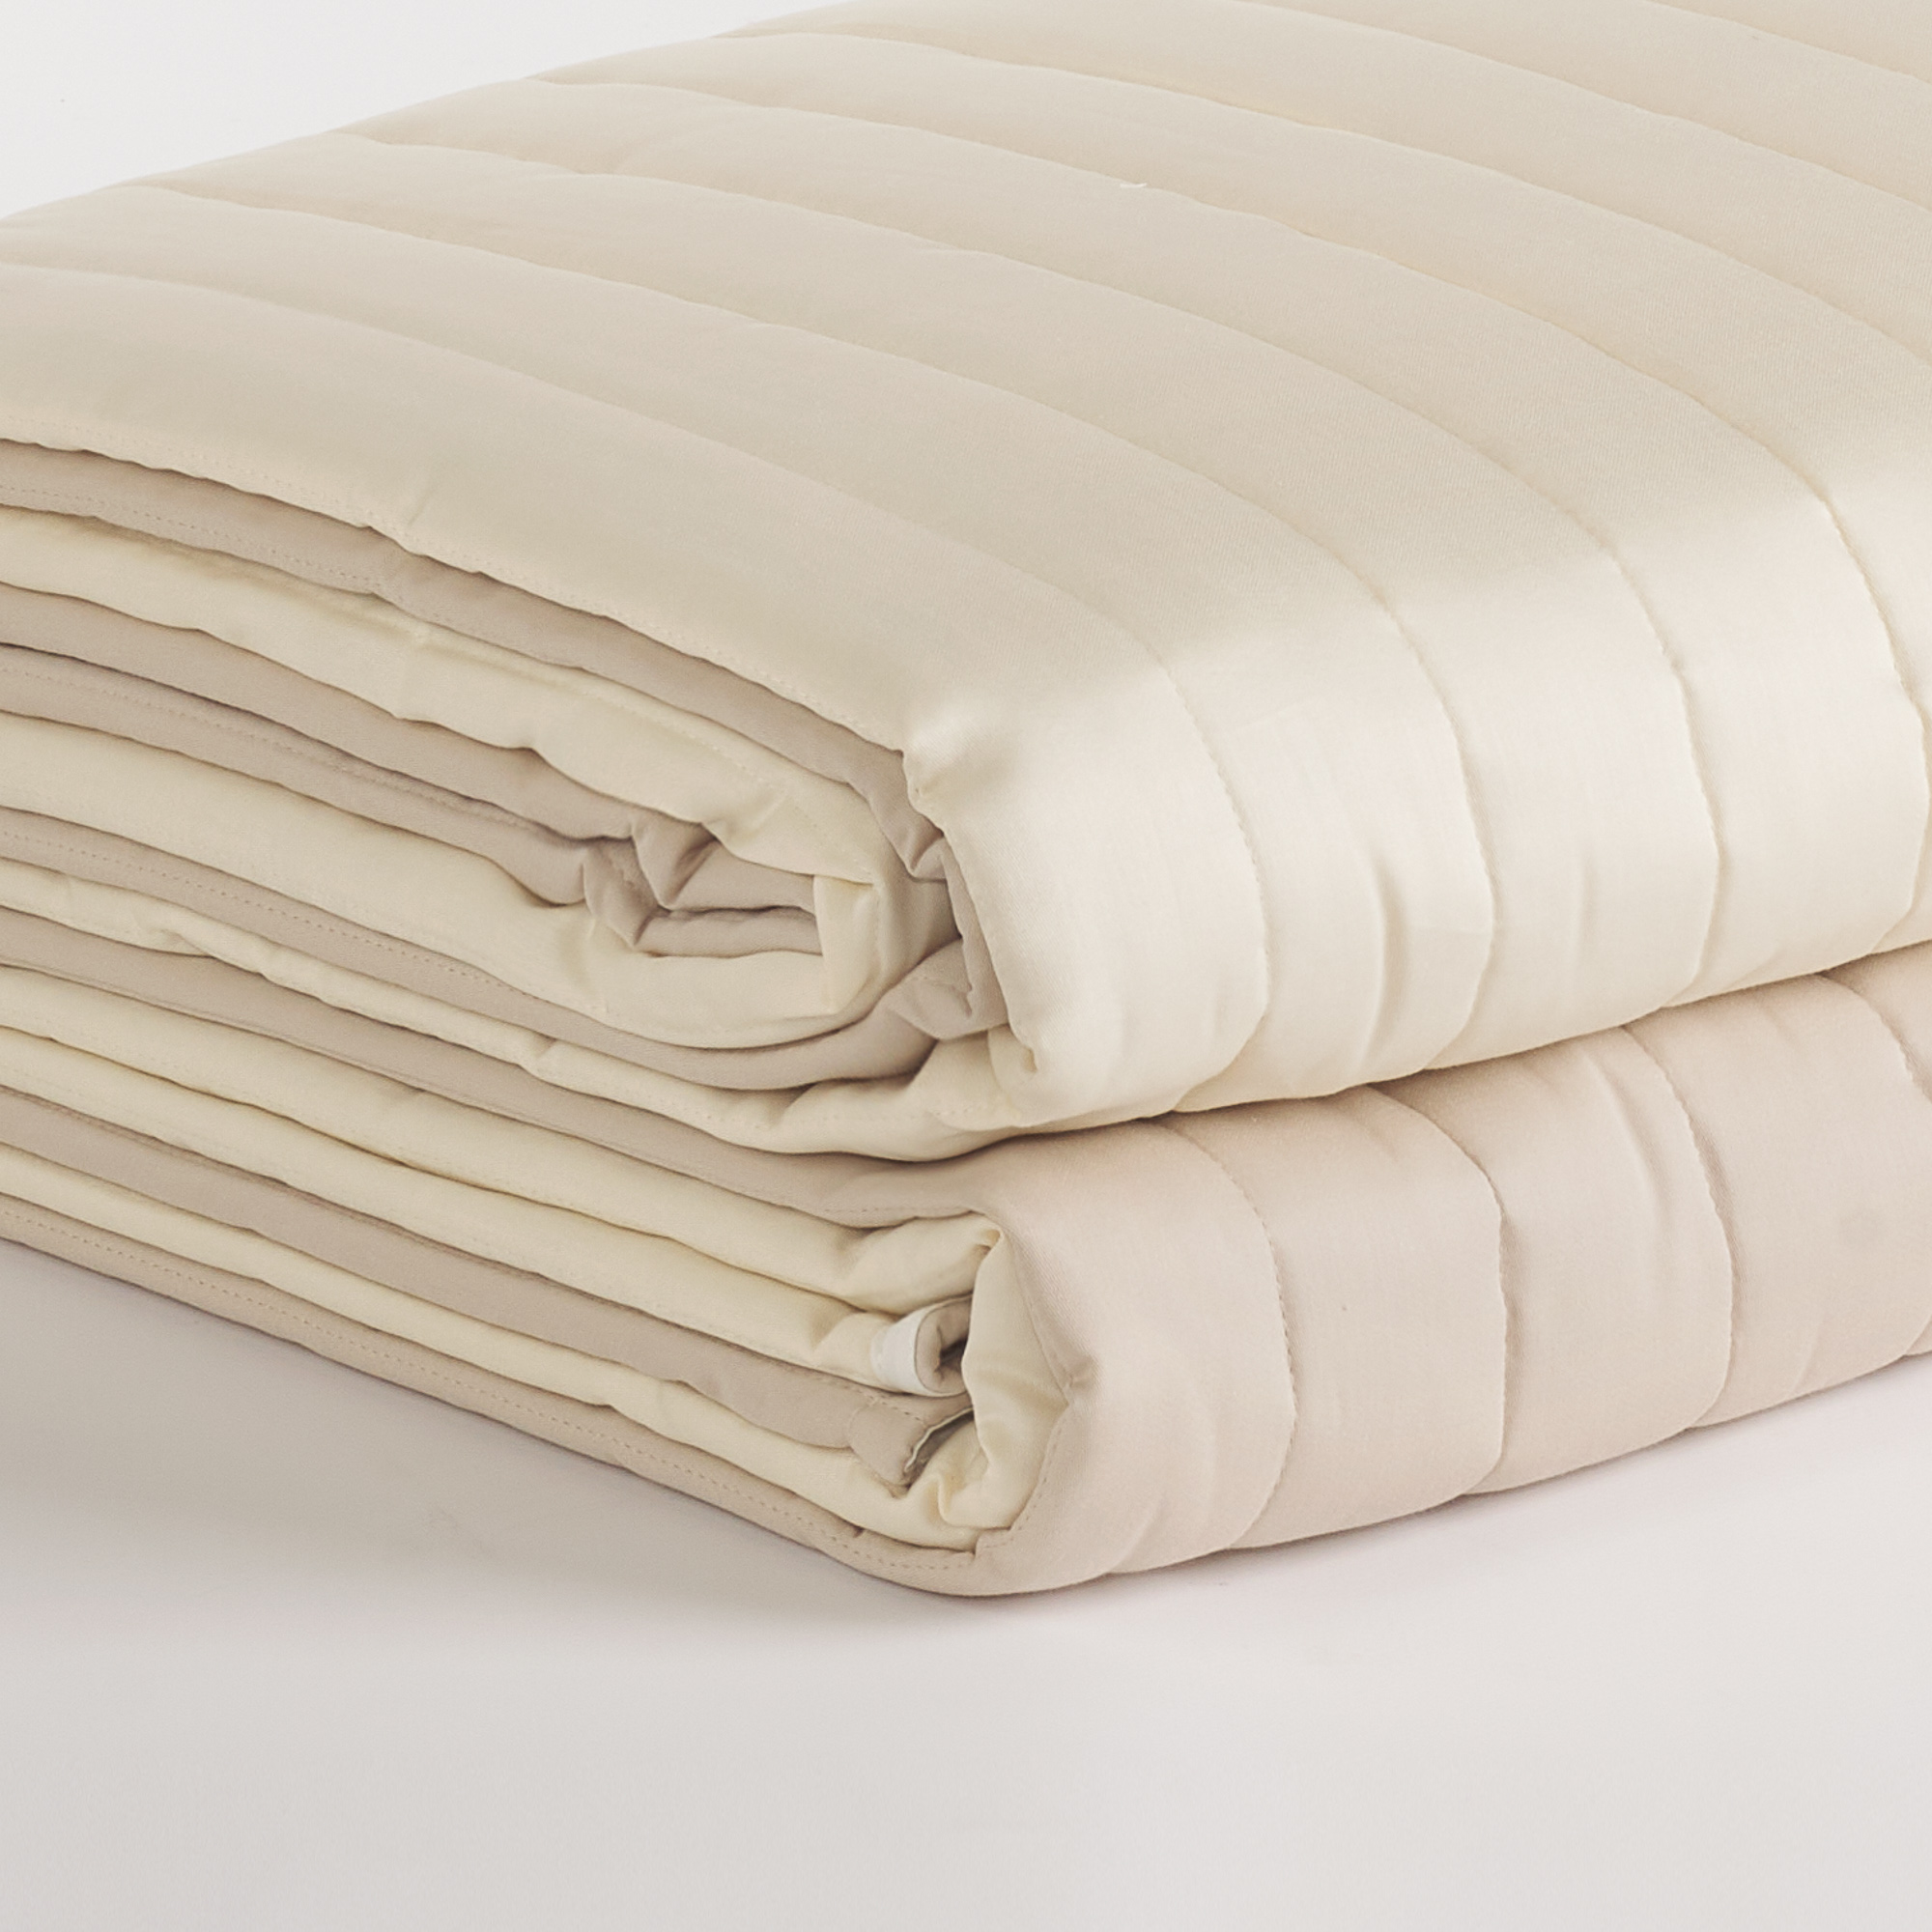 Trapuntino Quilt Double Face Antibes sabbia / crema Via Roma 60